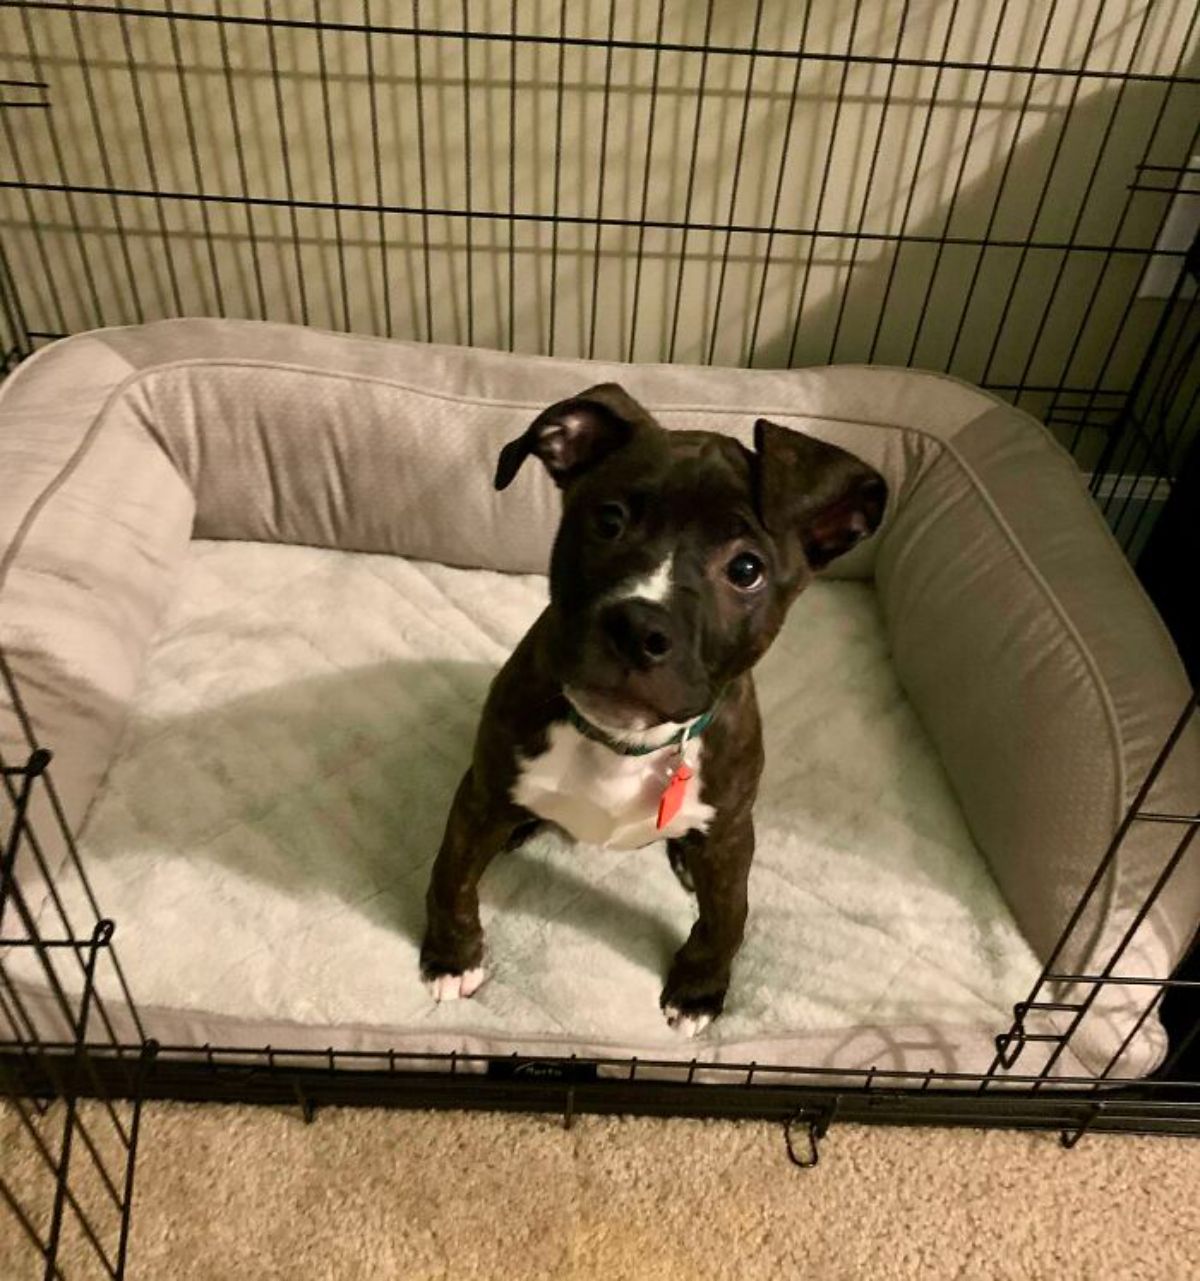 brown and white pitbull puppy standing on a white dog bed inside a black metal crate